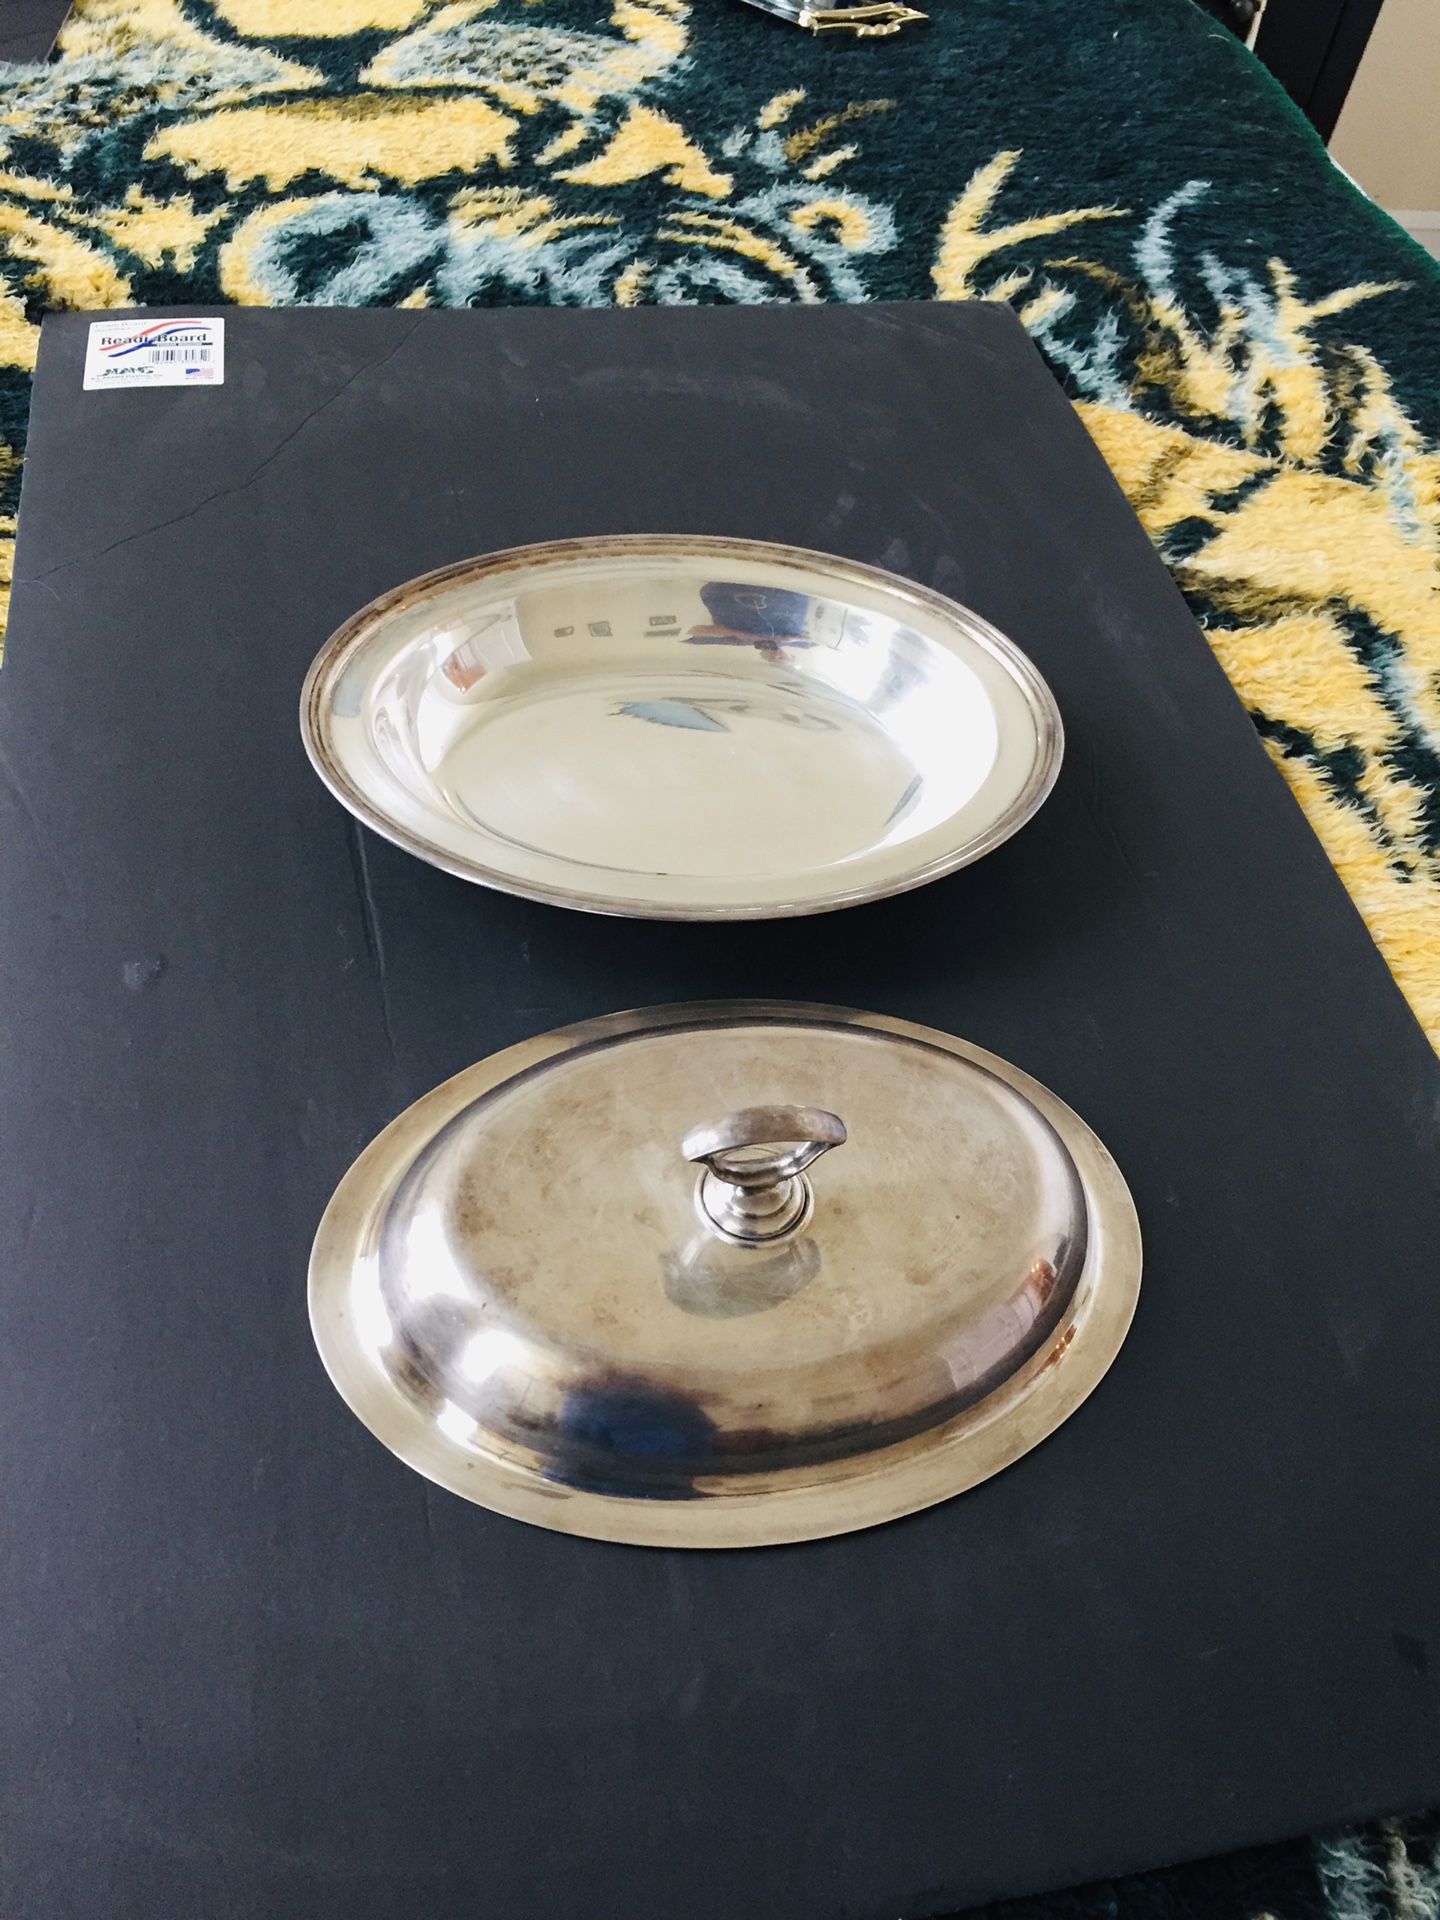 Vintage Antique. Metal oval bowl with lid. Like new condition. 11.25” x 8.25”.   Hight: 1.5” with no lid on. Hight: 4” with lid on - up to the top of 